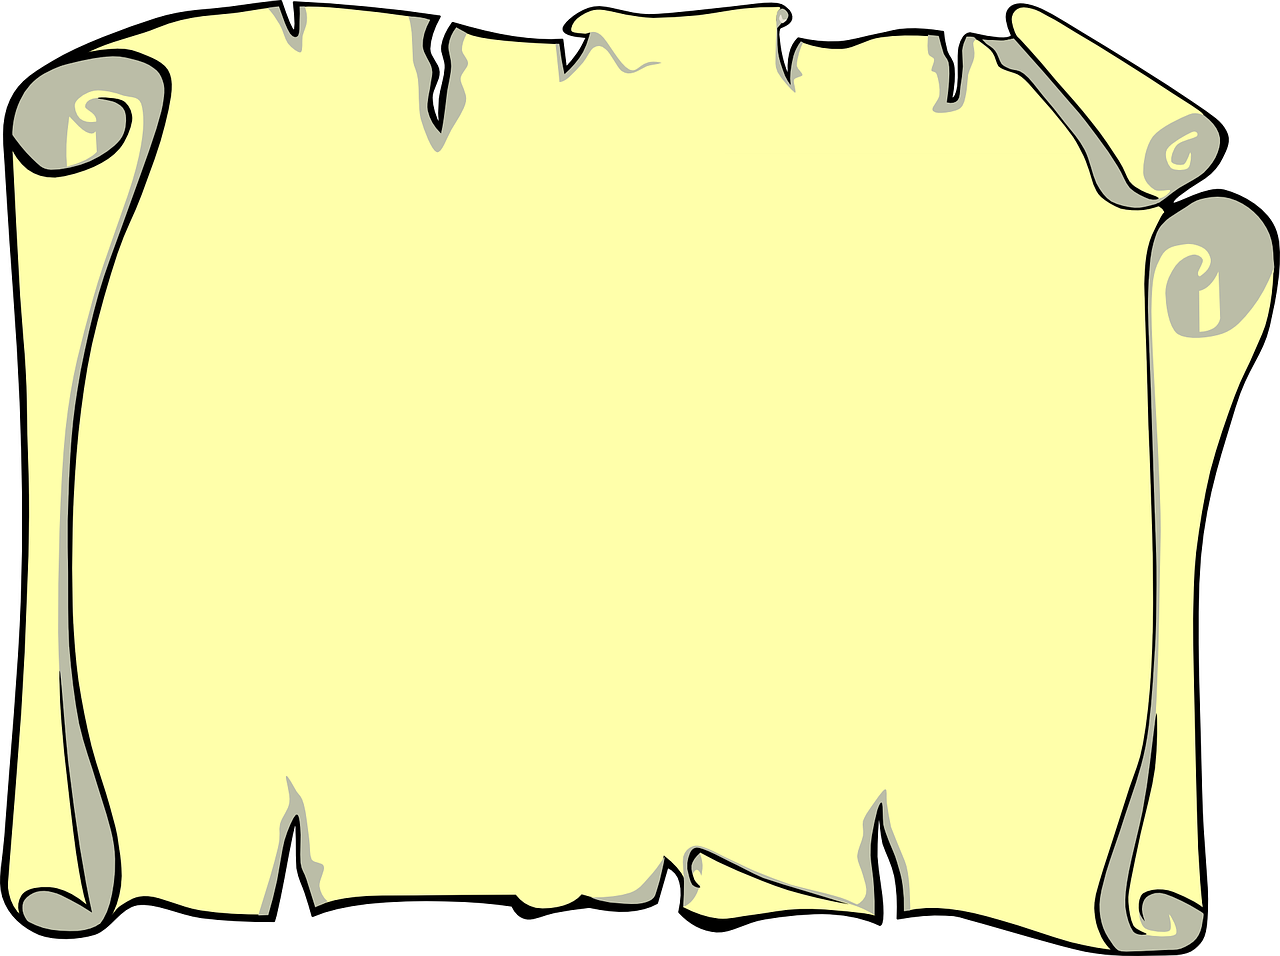 a scroll of paper on a black background, a cartoon, soft yellow background, thick thick thick outlines, background is the ruins, wide frame